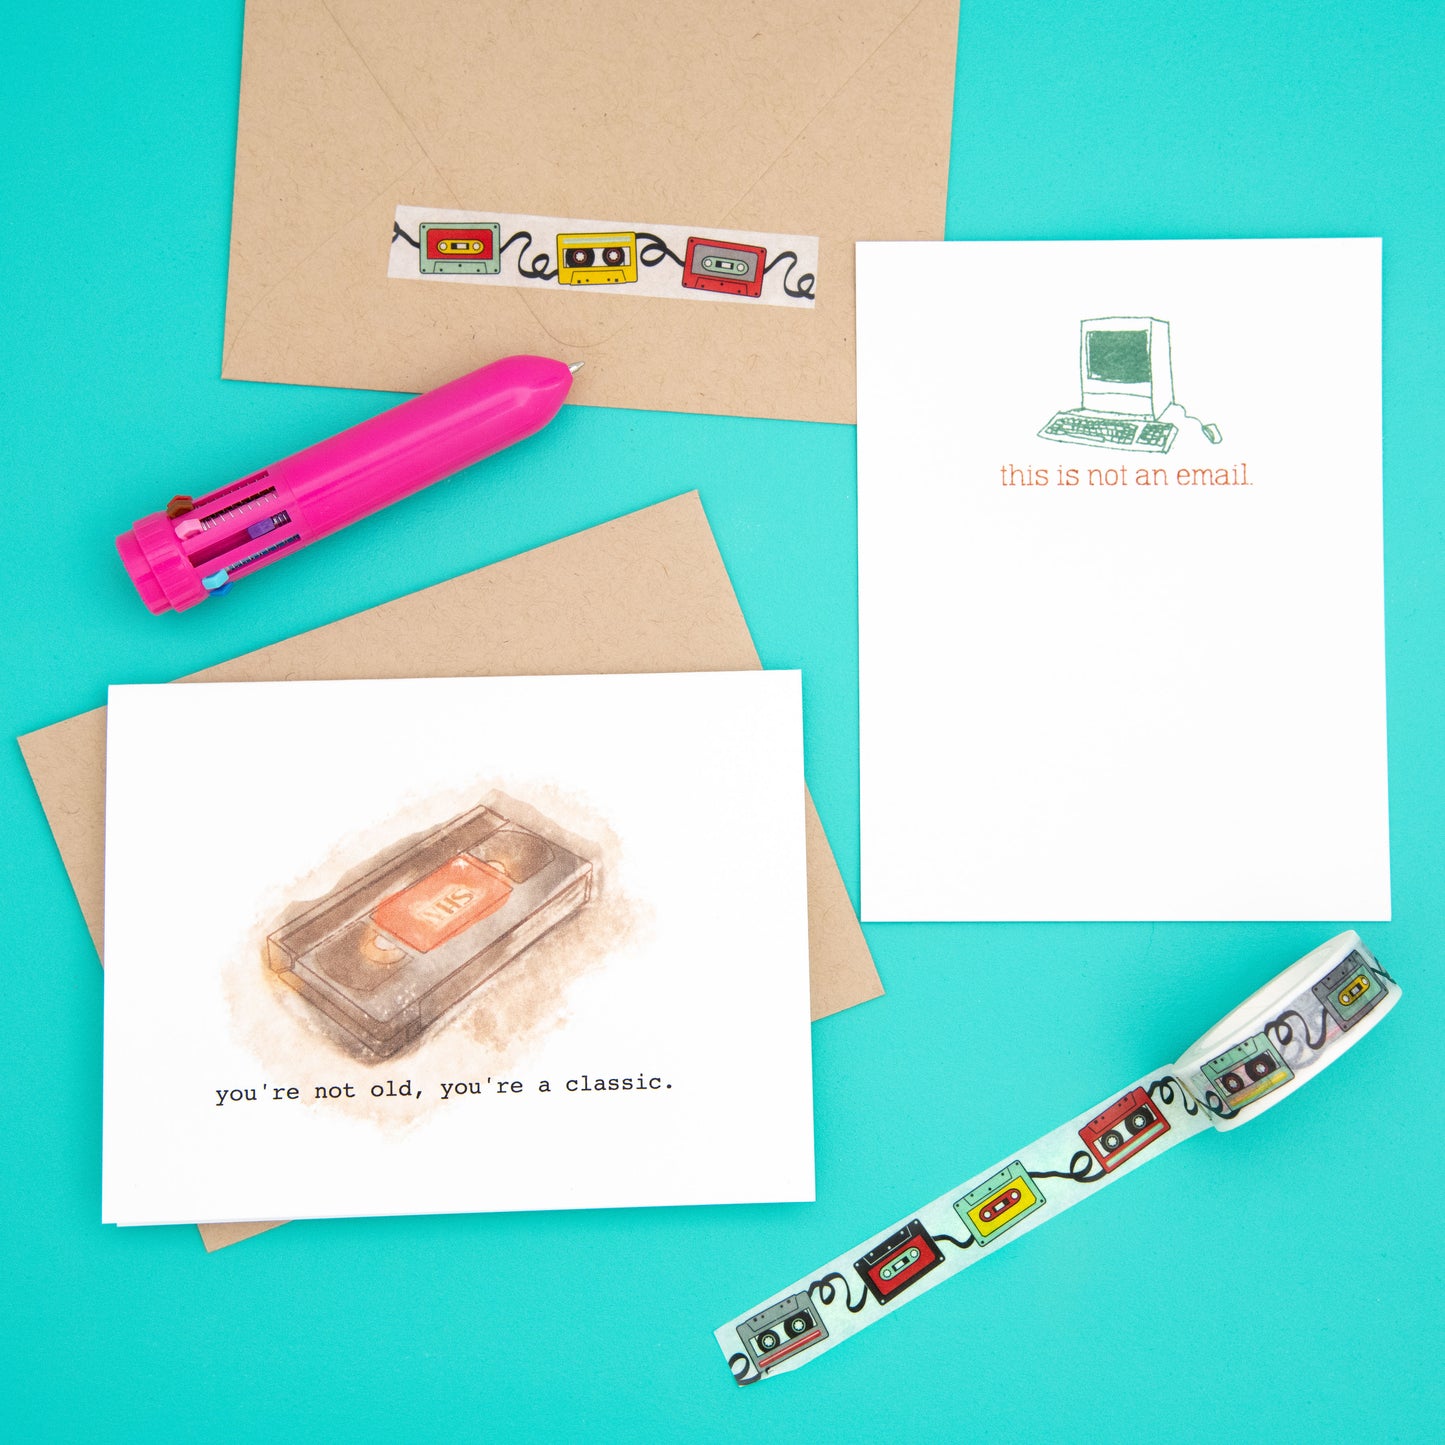 Add some retro flair to your stationery collection with our retro-themed subscription box! This box includes a 'You're Not Old, You're Classic' greeting card, a 'This Is Not An Email' flat note card, and a multi-colored retractable pen with retro vibes. Get ready to send some old school messages with this box!